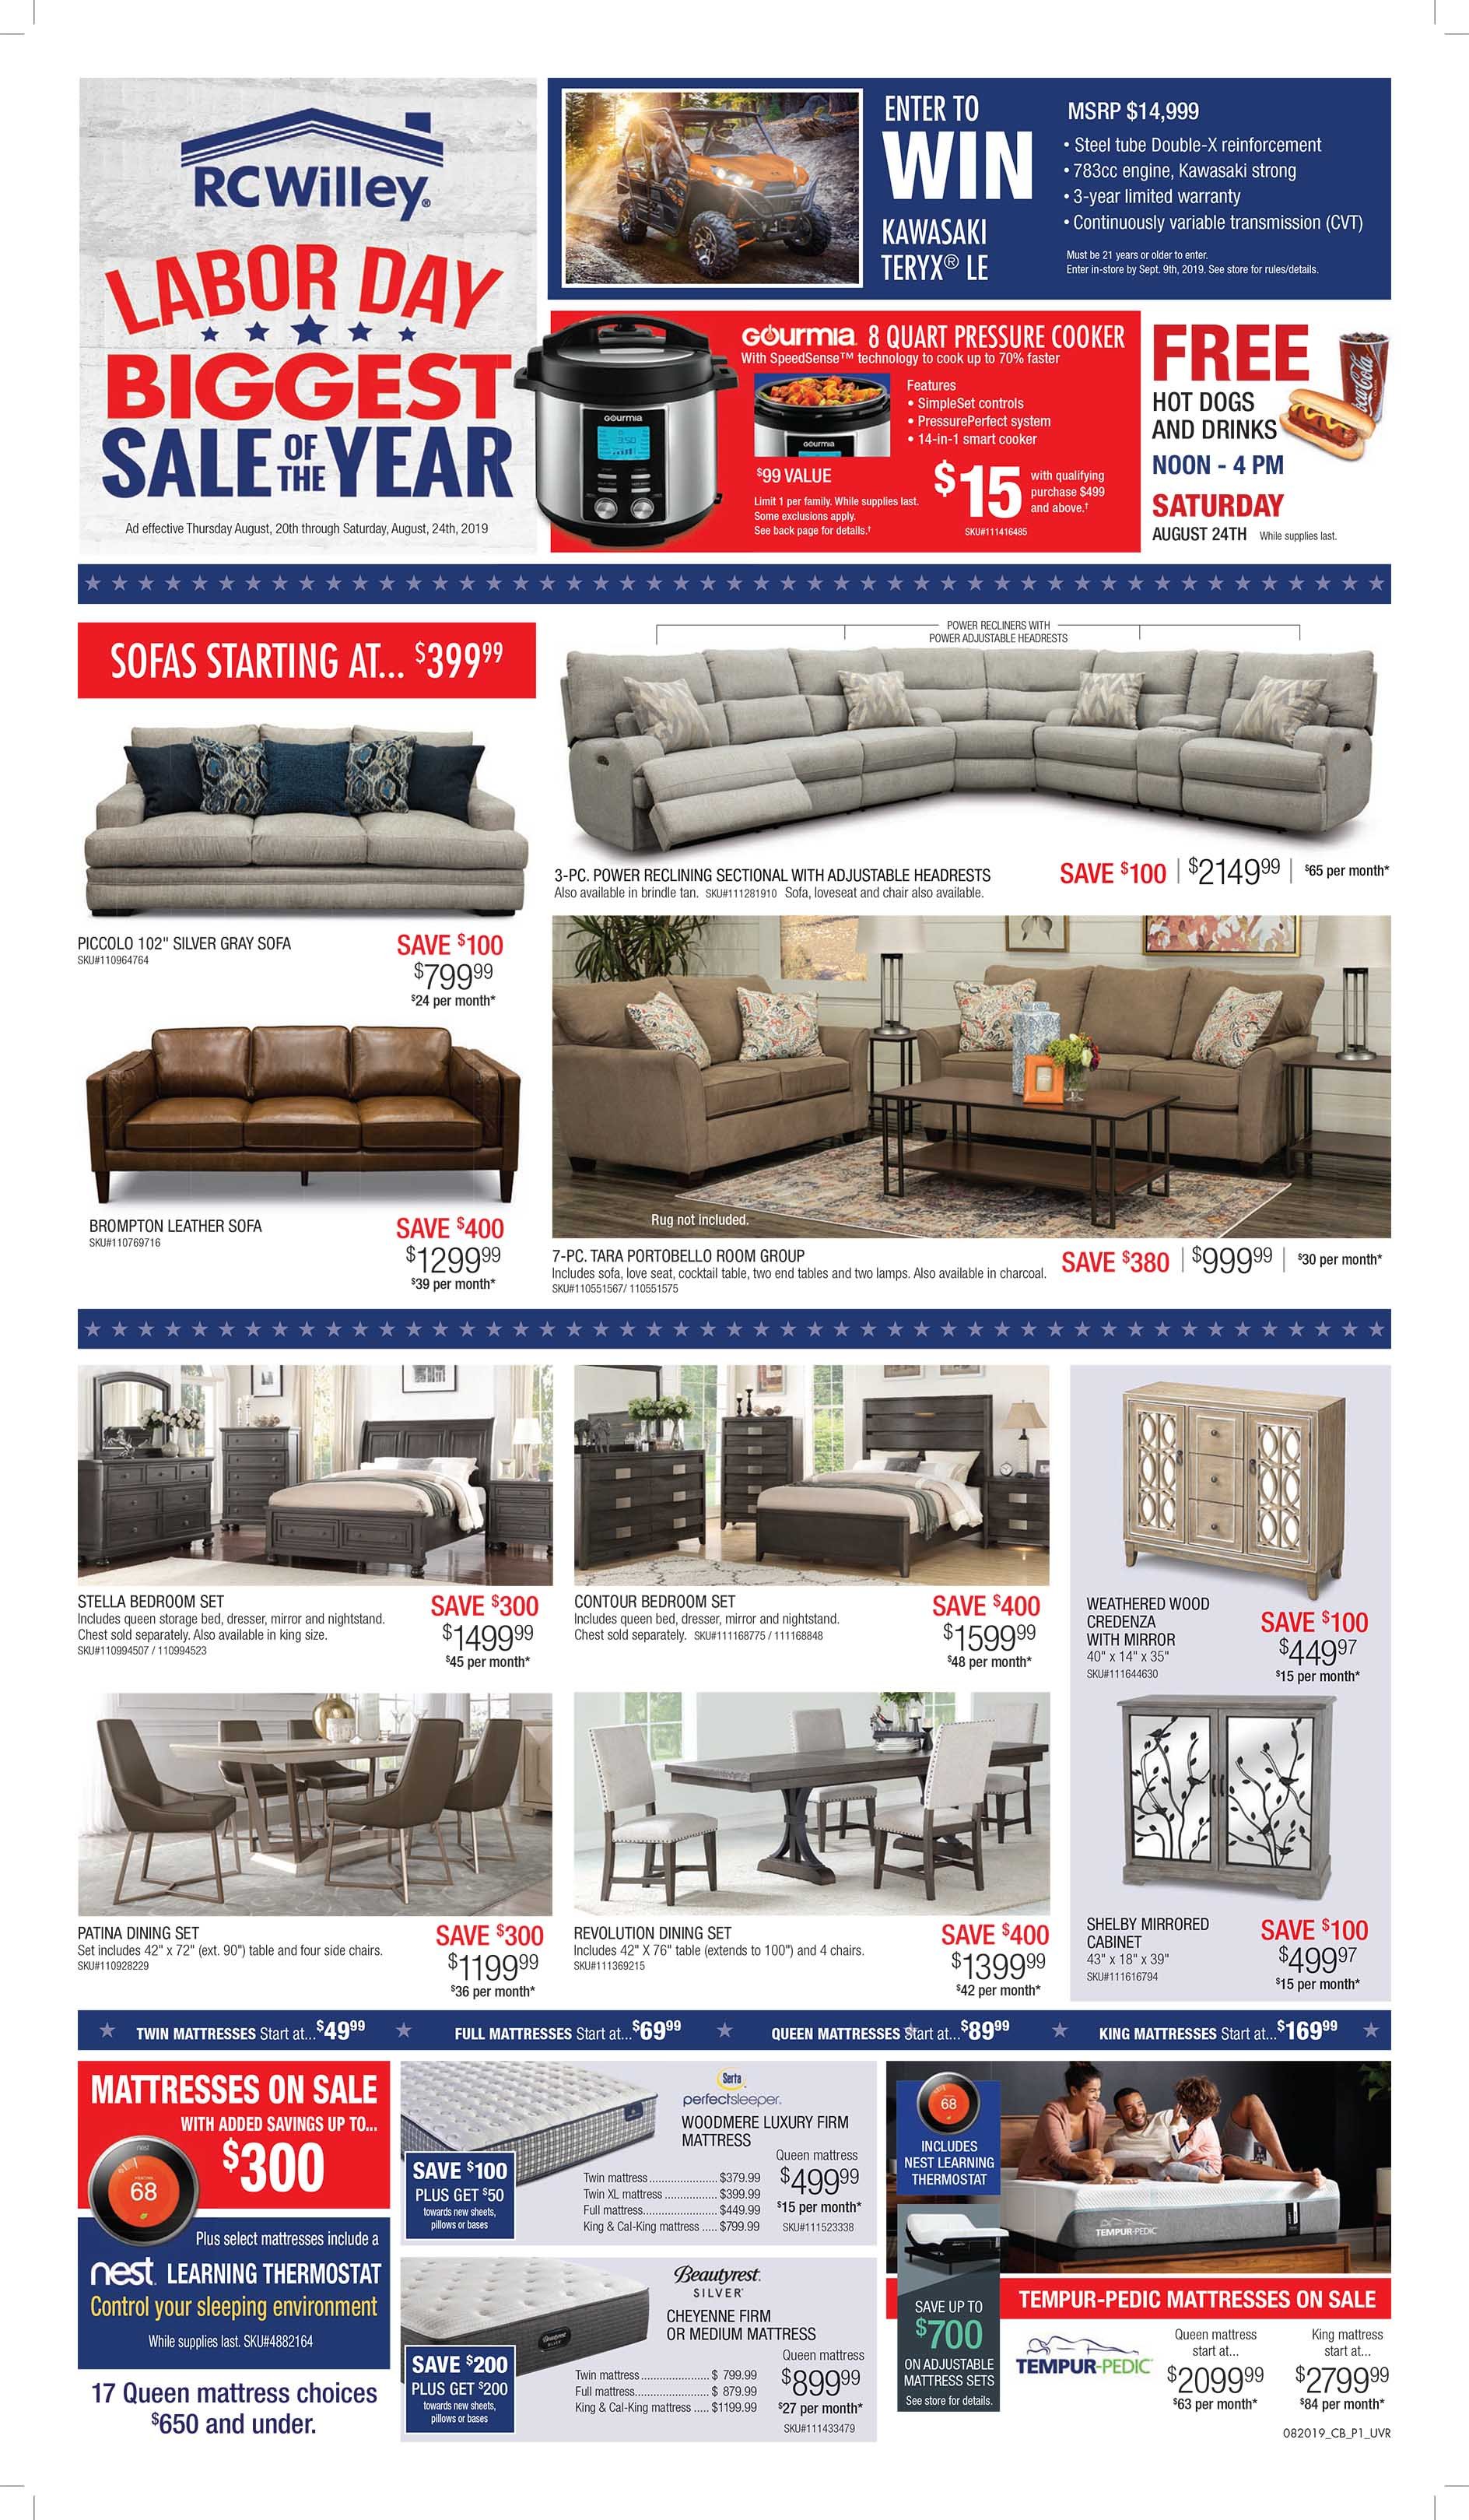 Labor Day Savings Going on Now at RC Willey!